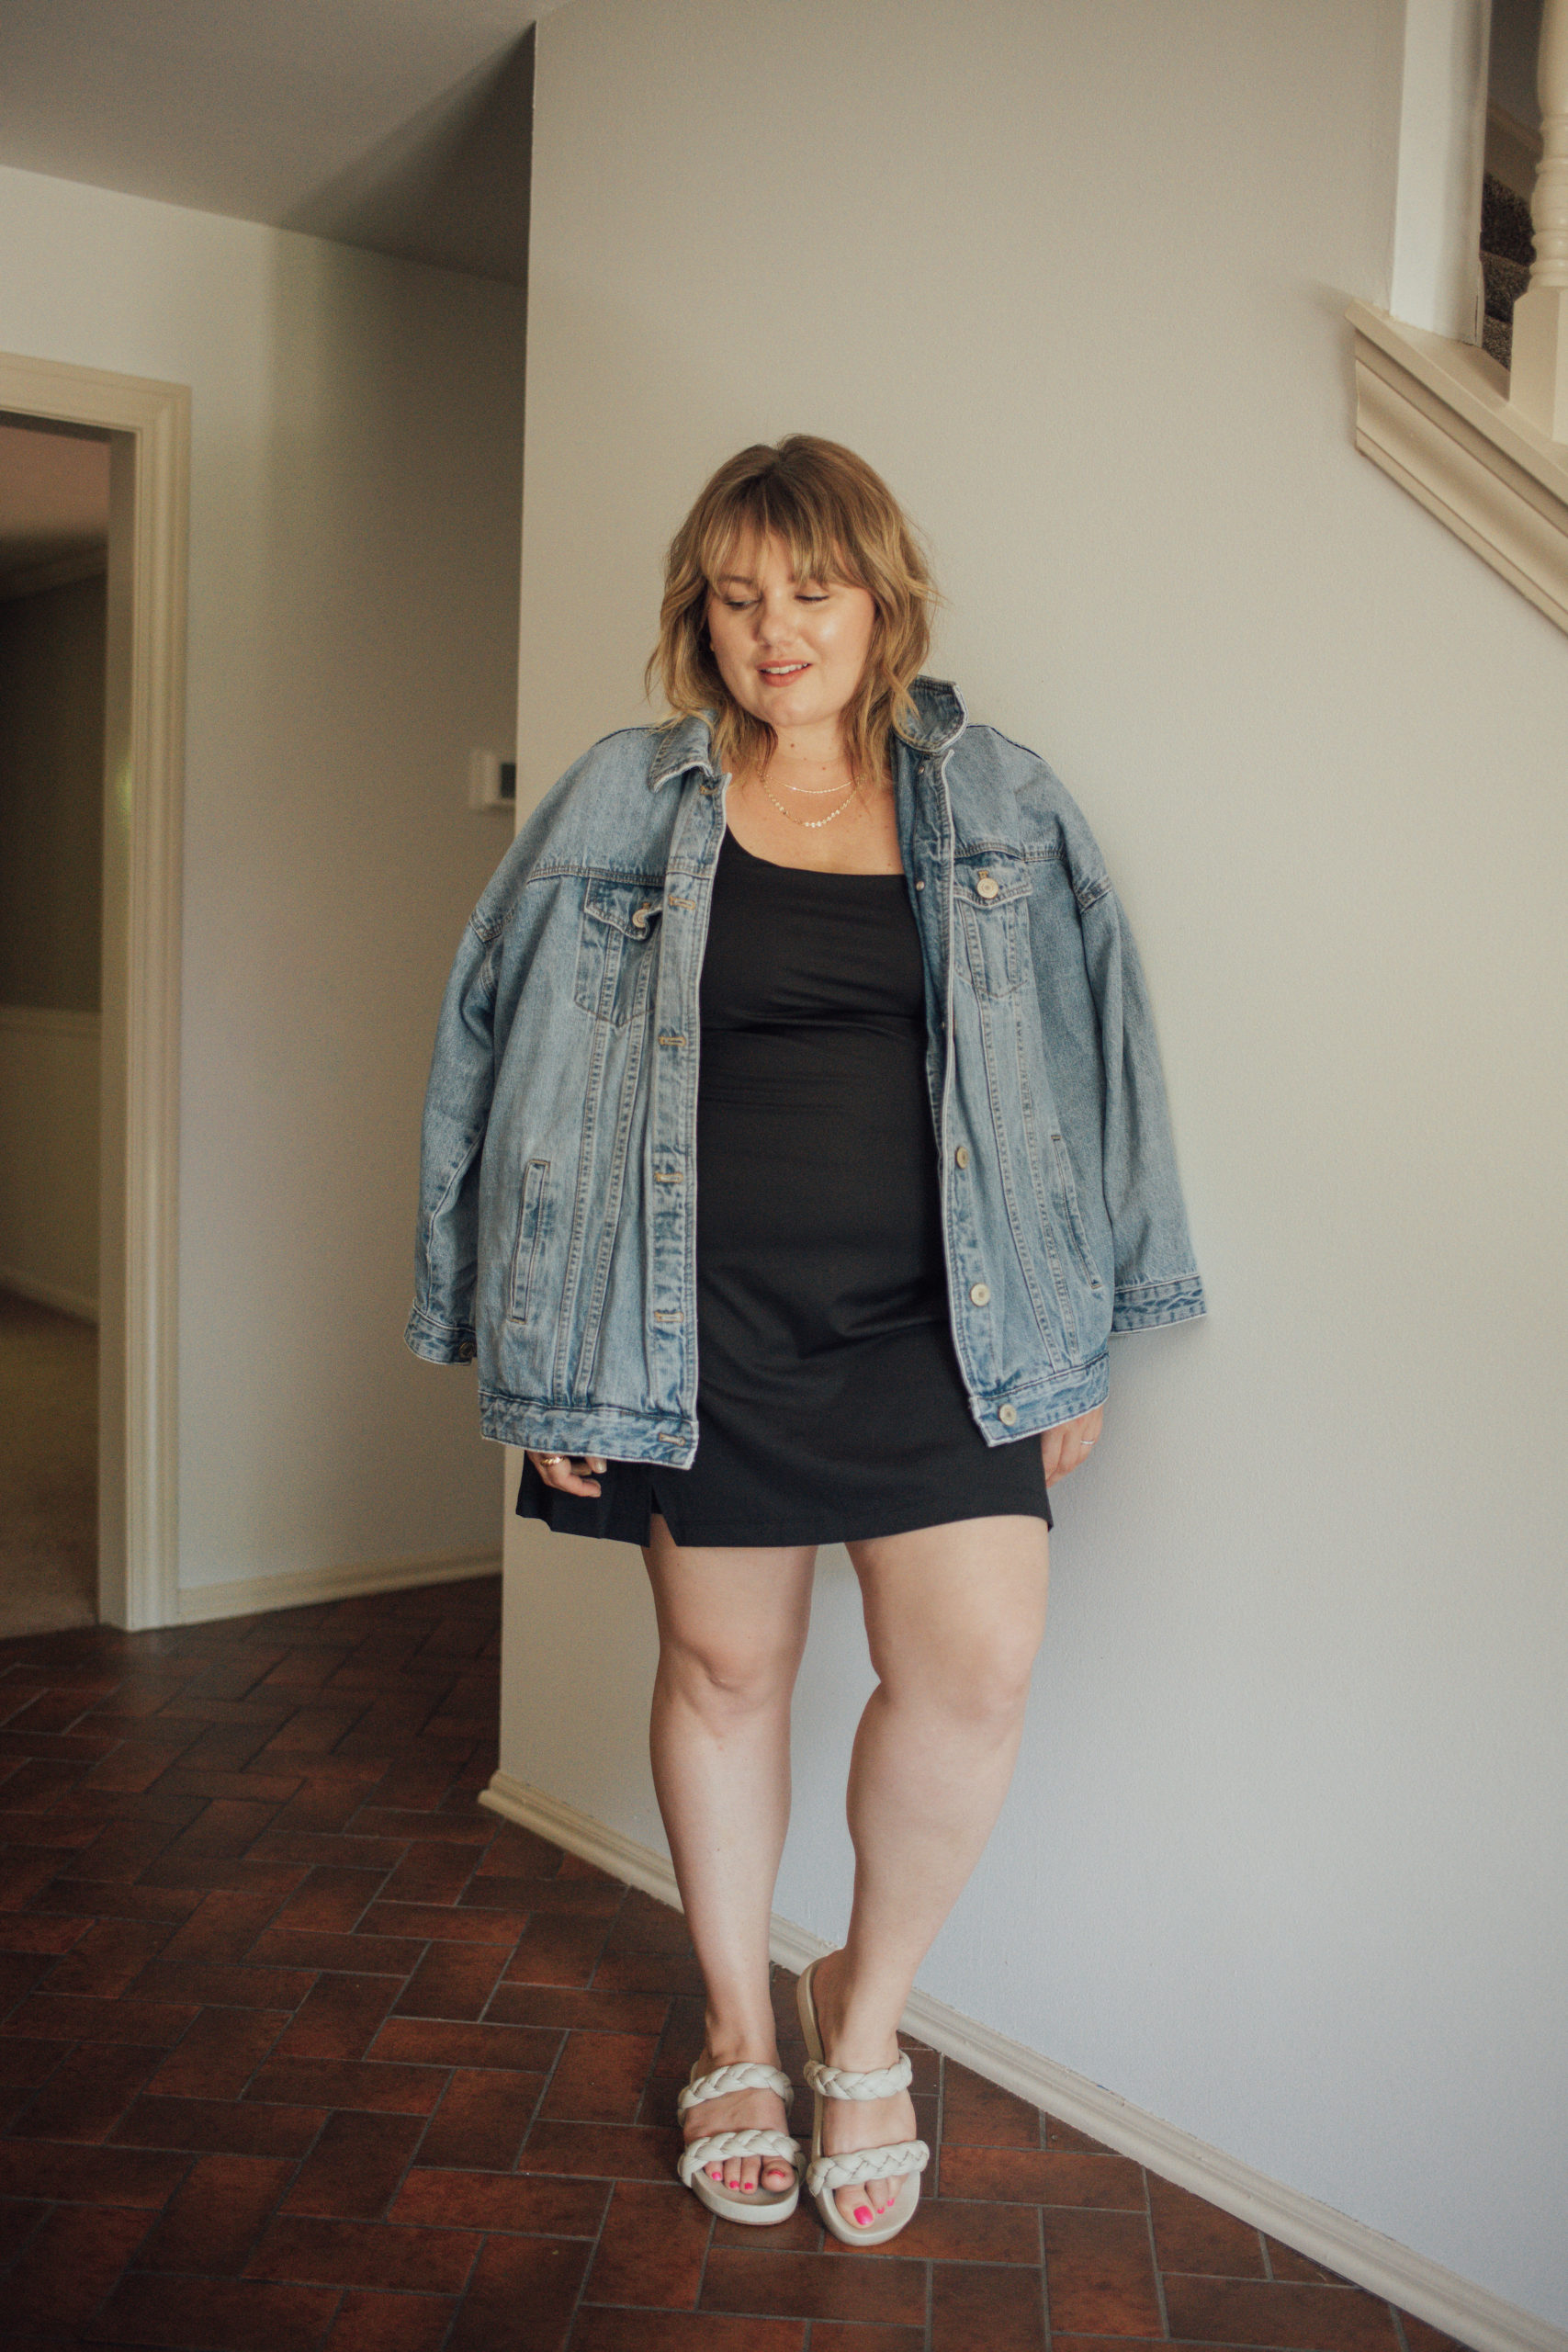 Sharing a look at the Athletic Dress trend and where you can shop for chic plus size options! Built in bra and shorts means super comfy! 